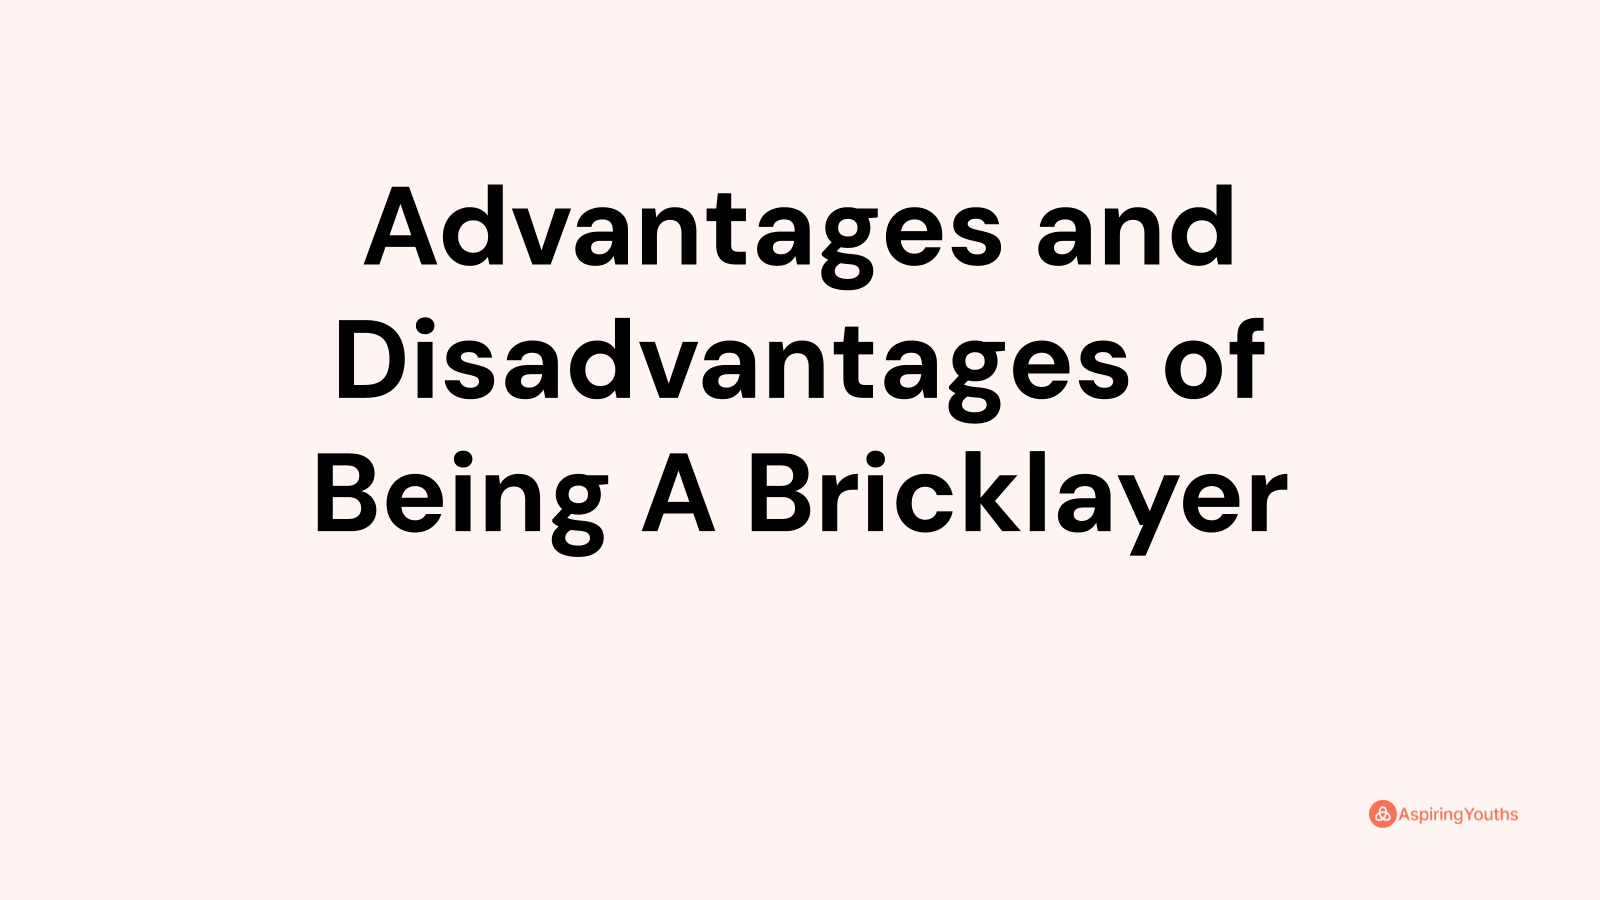 Advantages and disadvantages of Being A Bricklayer